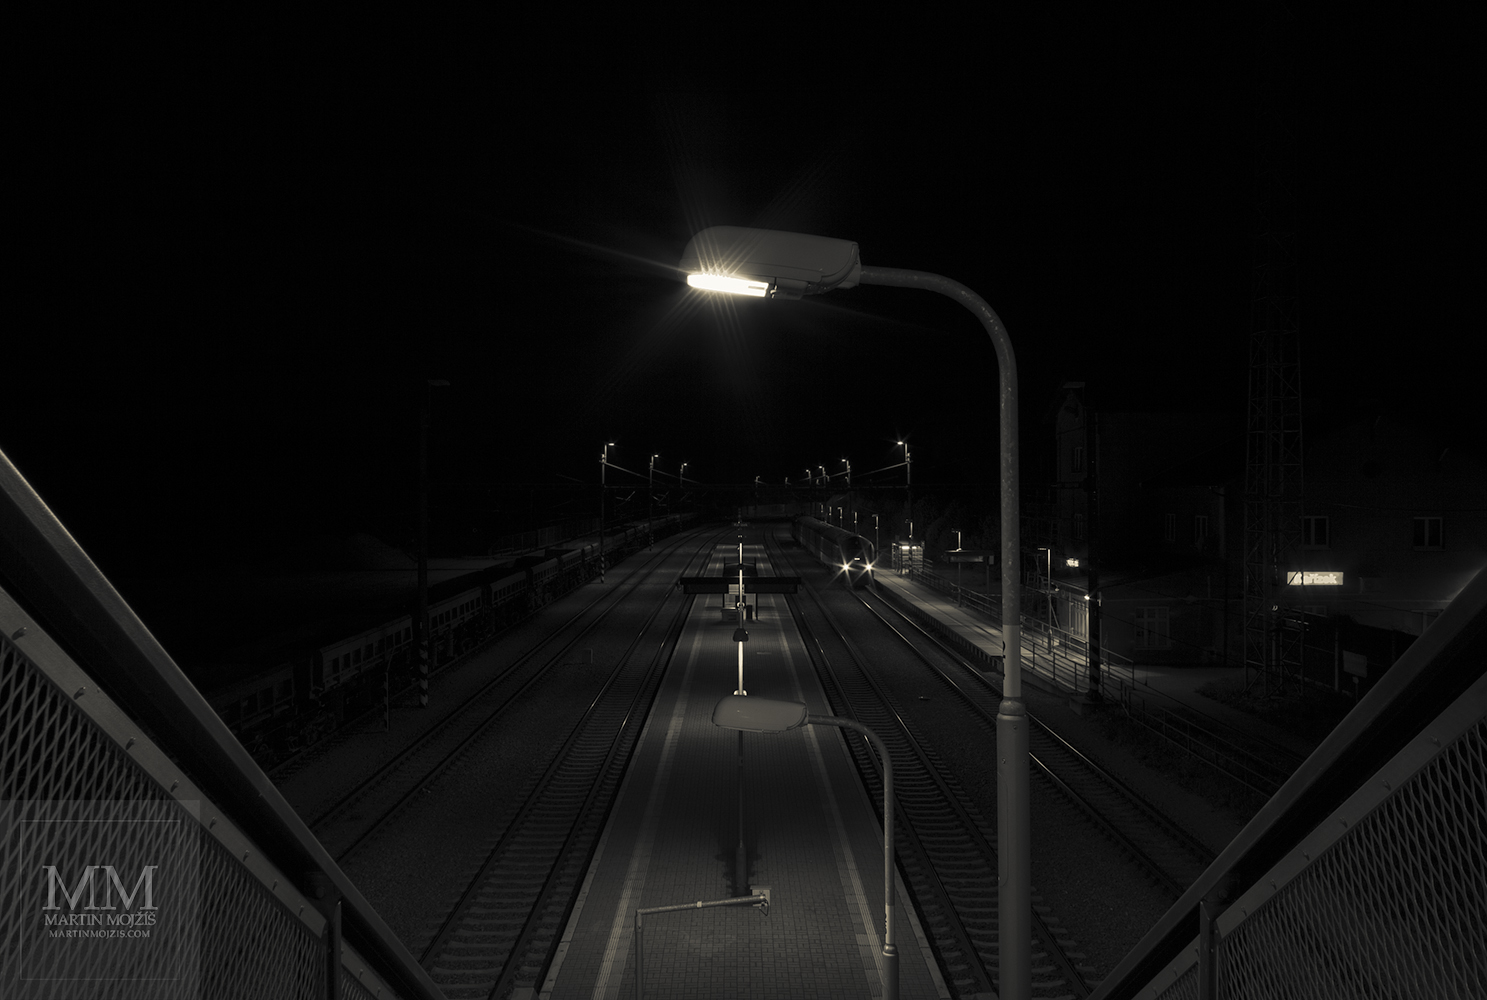 A lamp by the overpass staircase. Karizek railway station at night.